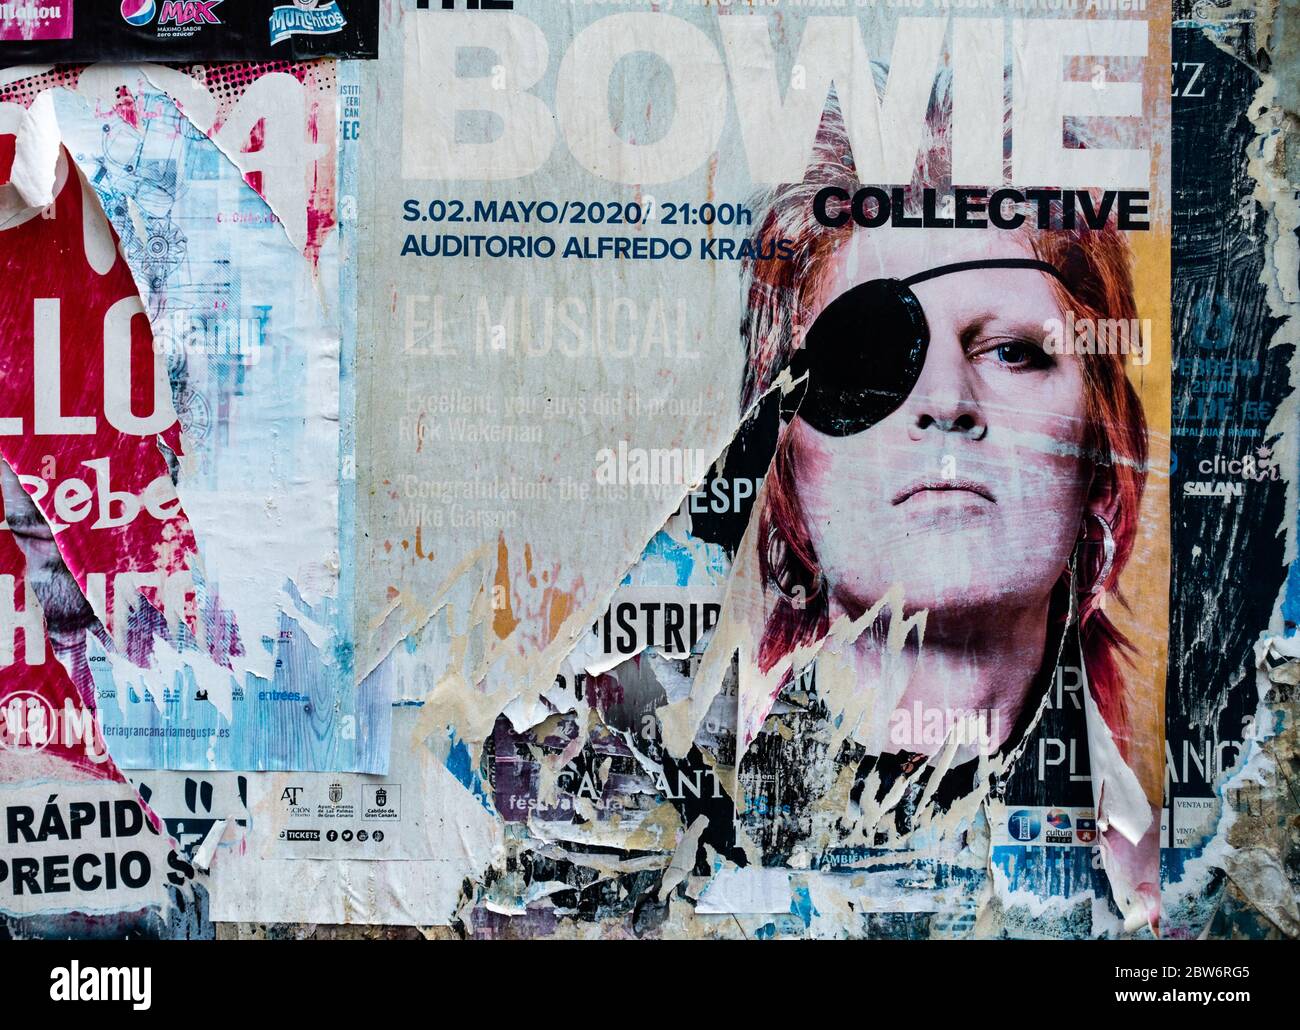 David Bowie tribute band, The Bowie Collective, poster in Spain Stock Photo